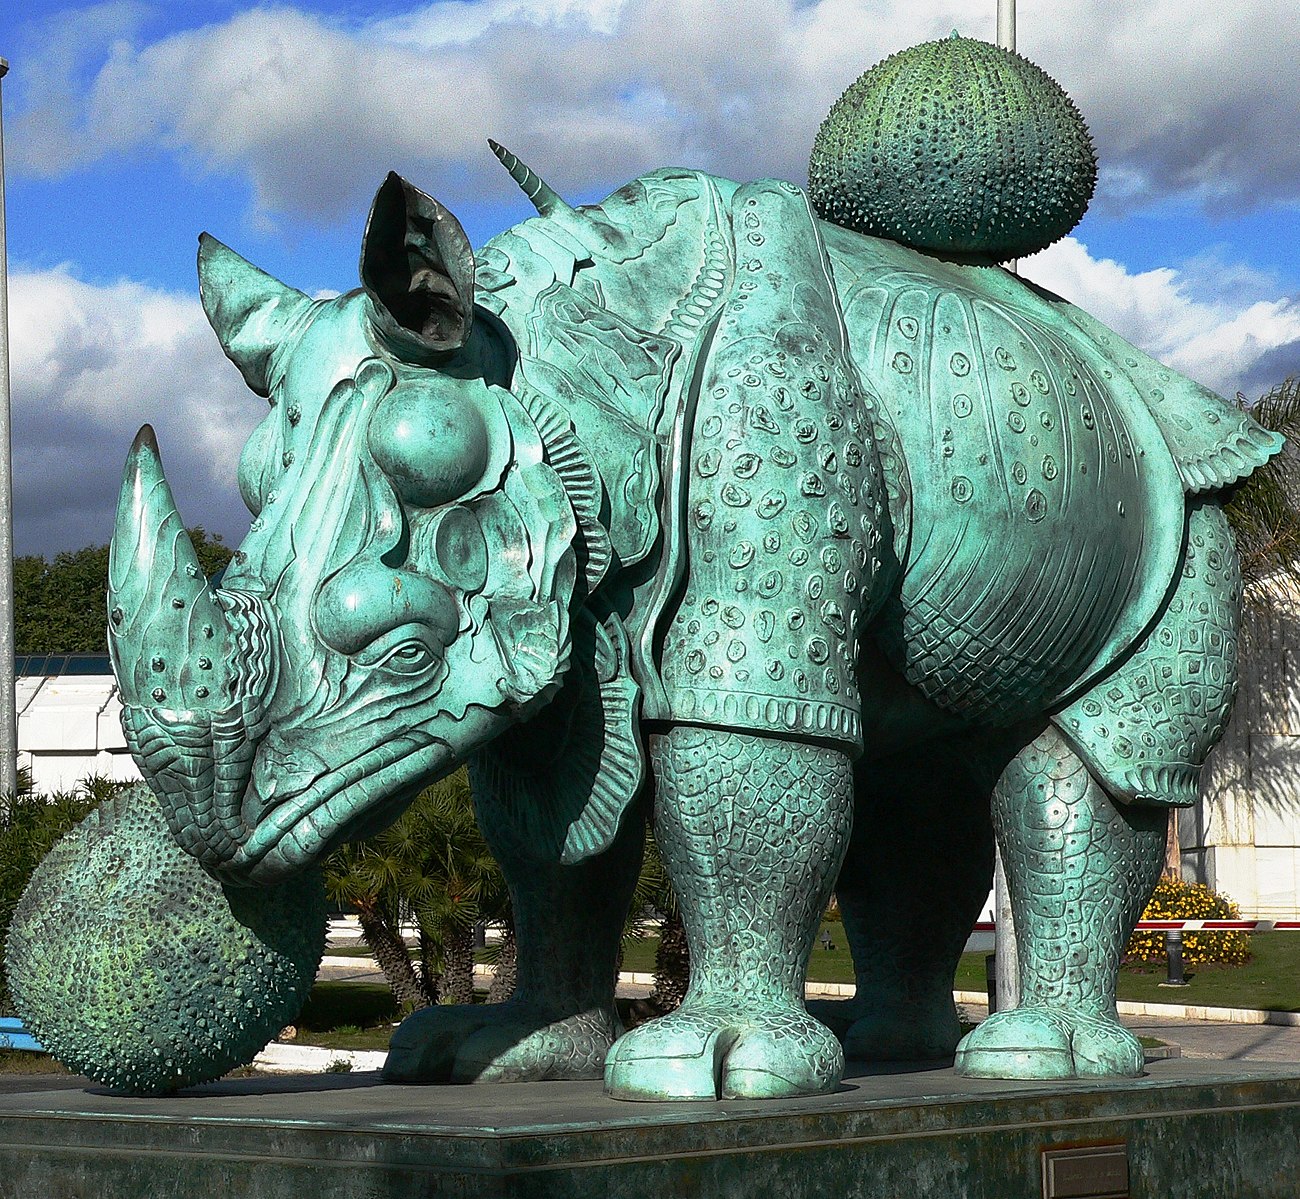 A large bronze sculpture of a rhinoceros with armor